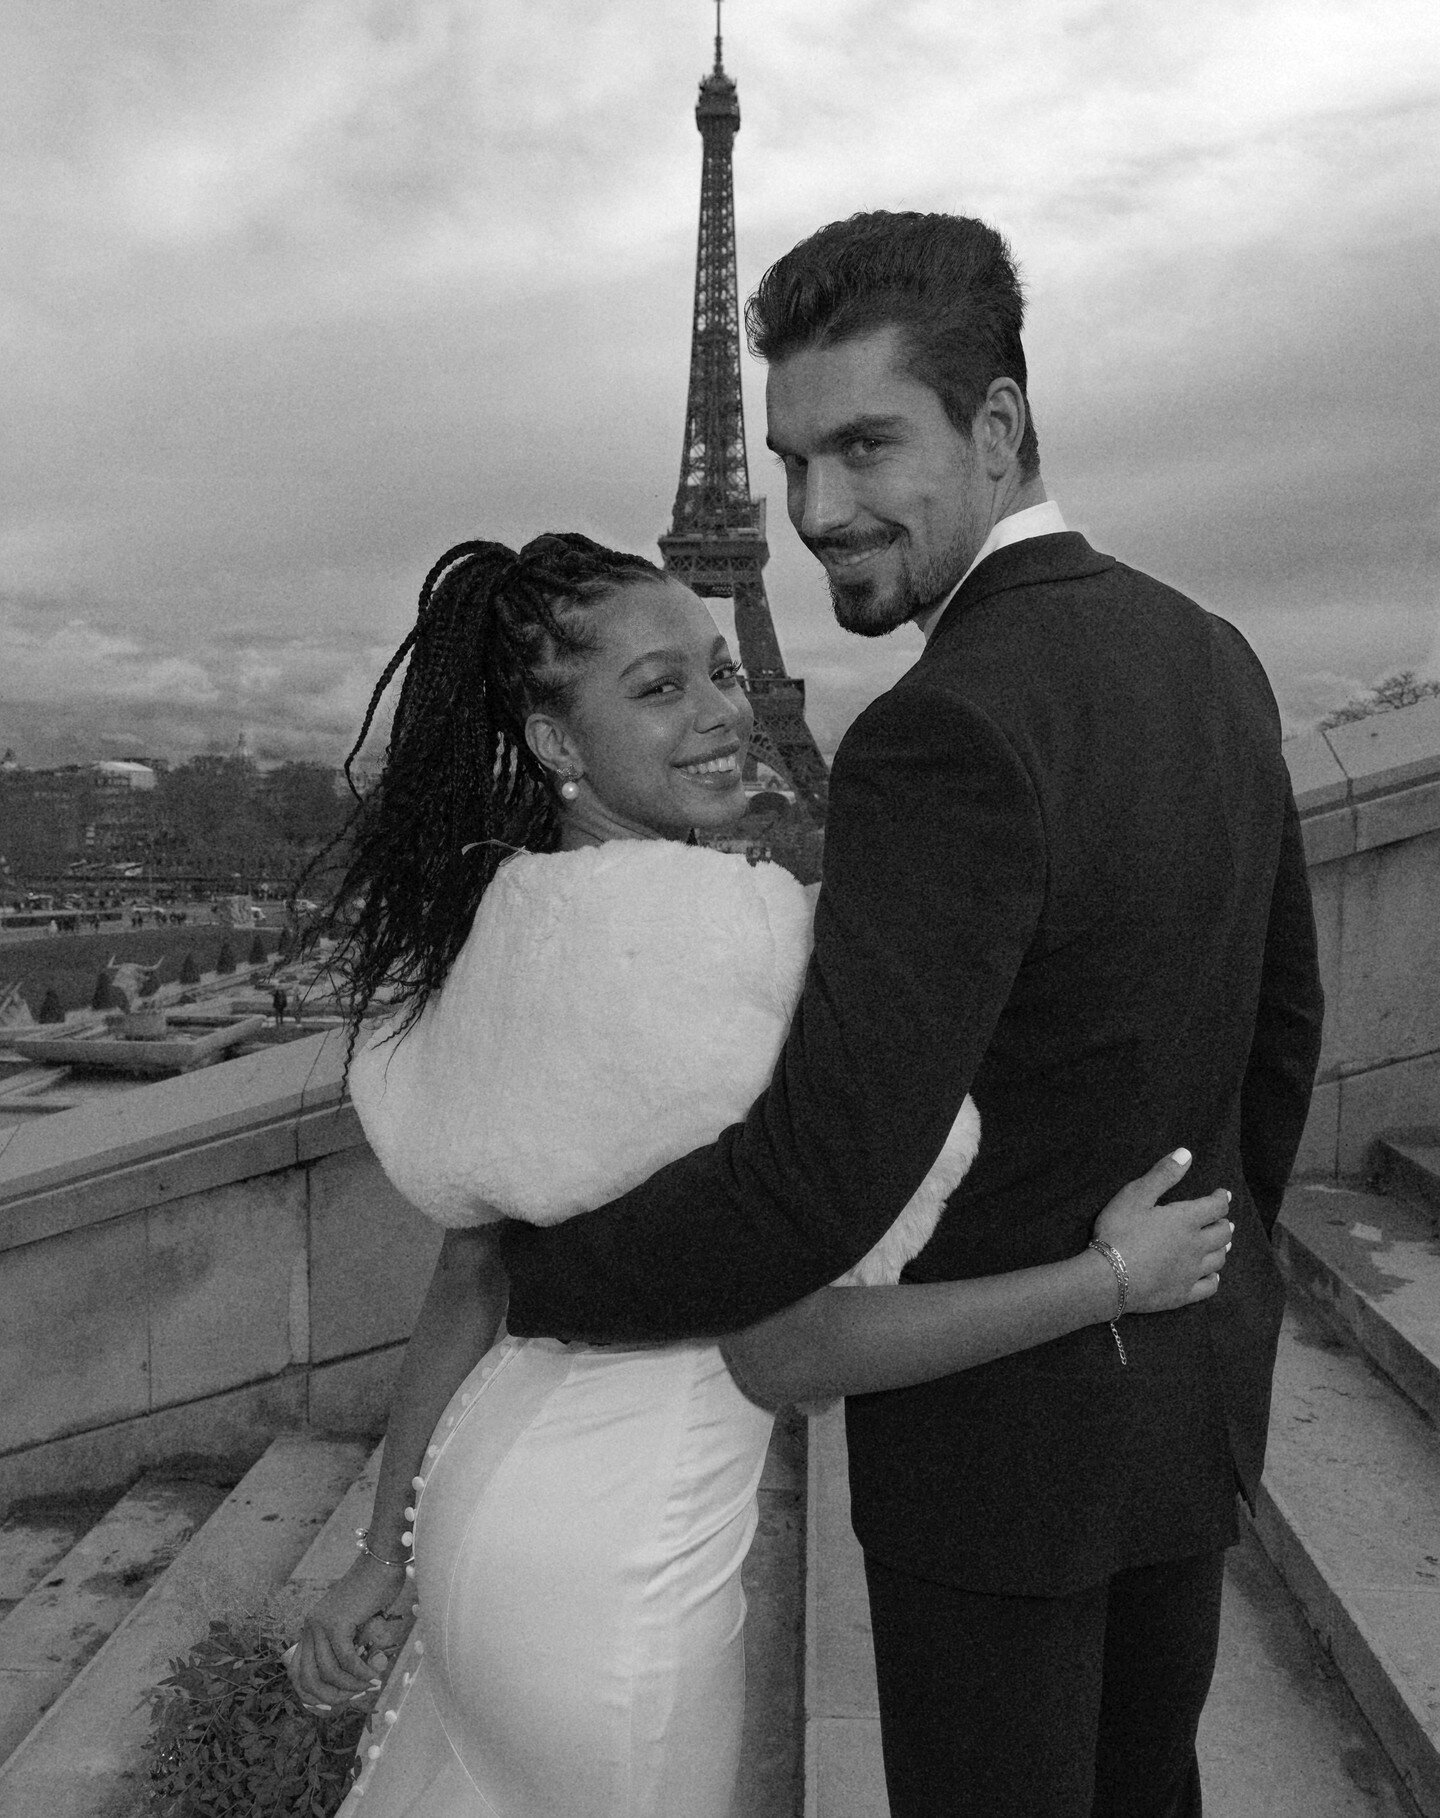 &quot;Saying &quot;I do&quot; at the top of the world 🌍 The Eiffel Tower, an international destination for brides to celebrate love, stands tall at 324 meters (1,063 feet). It's history and unparalleled views make it the perfect spot for a wedding p